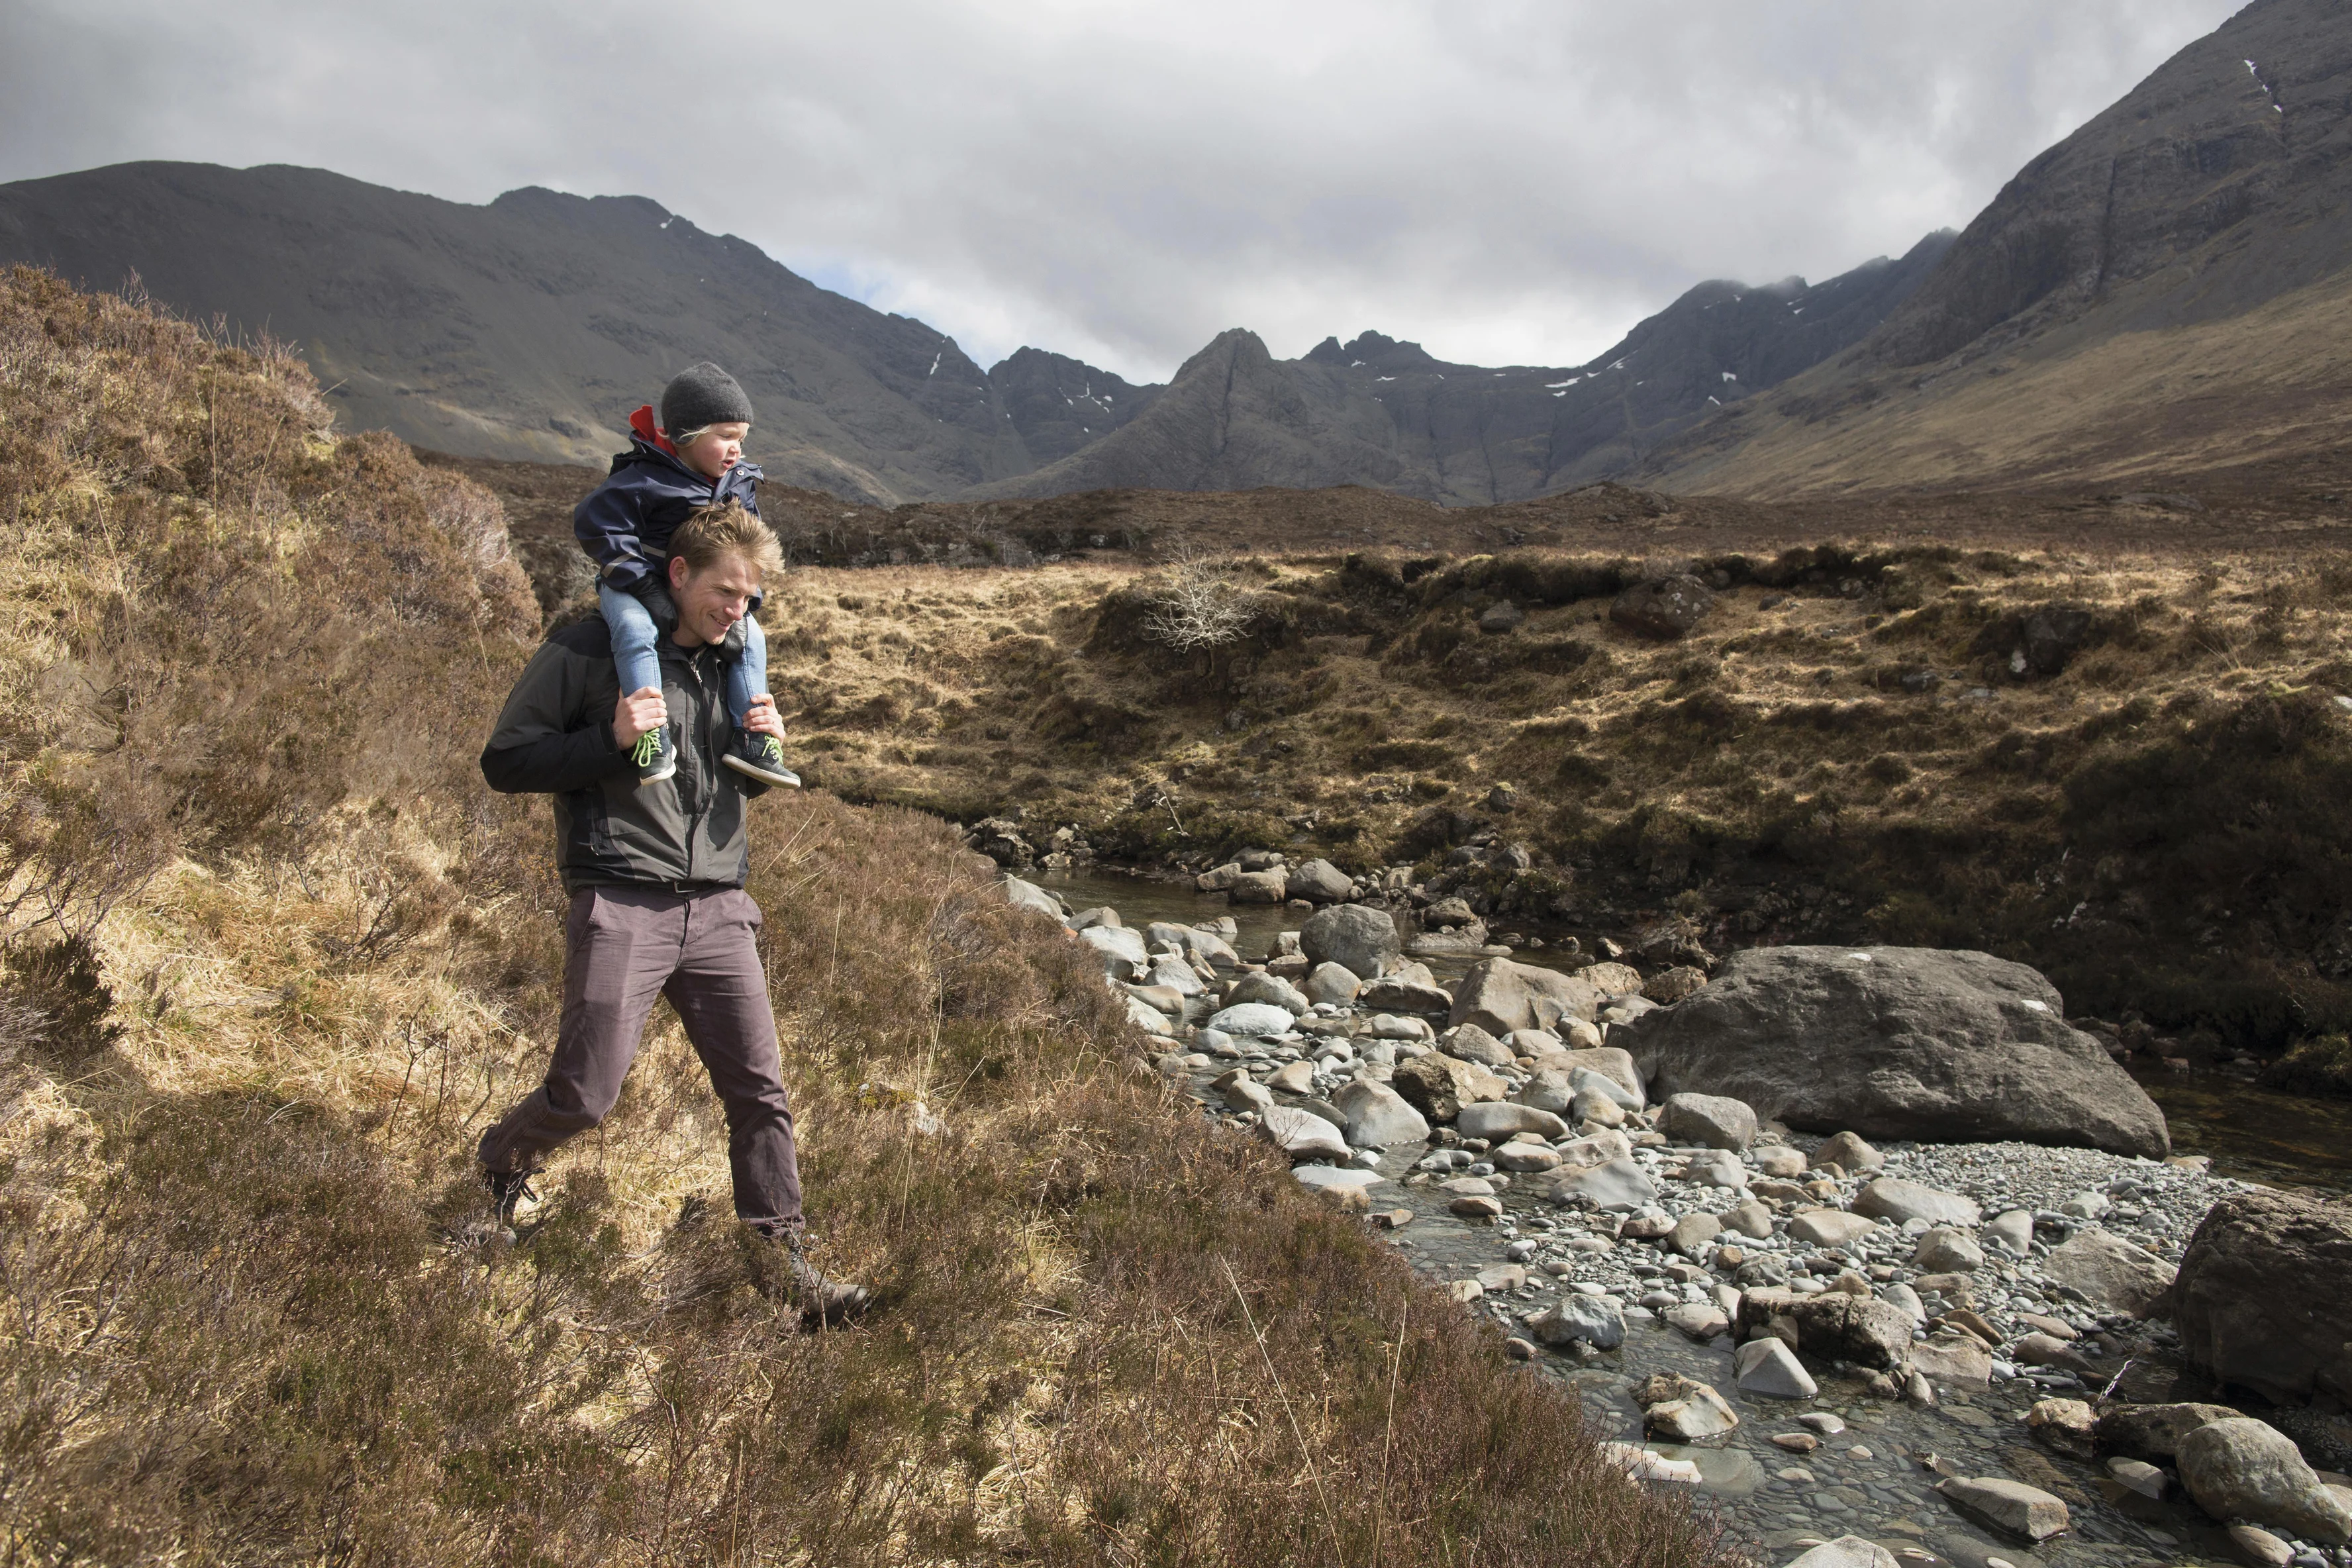 a man and a boy walking on a rocky path in a valley